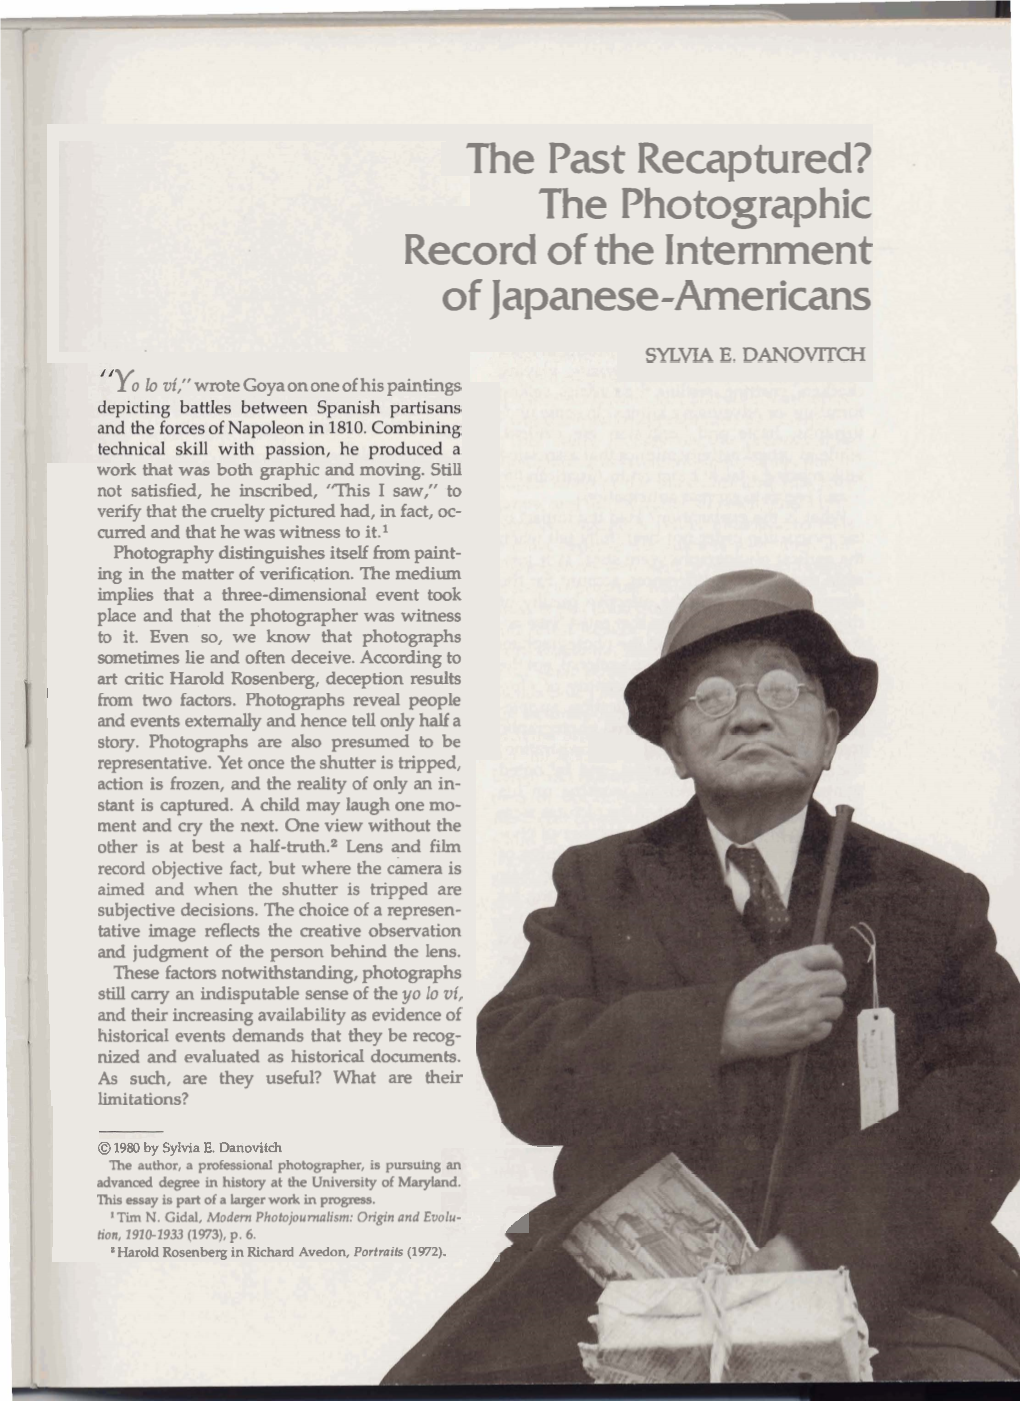 The Photographic Record of the Internment of Japanese-Americans